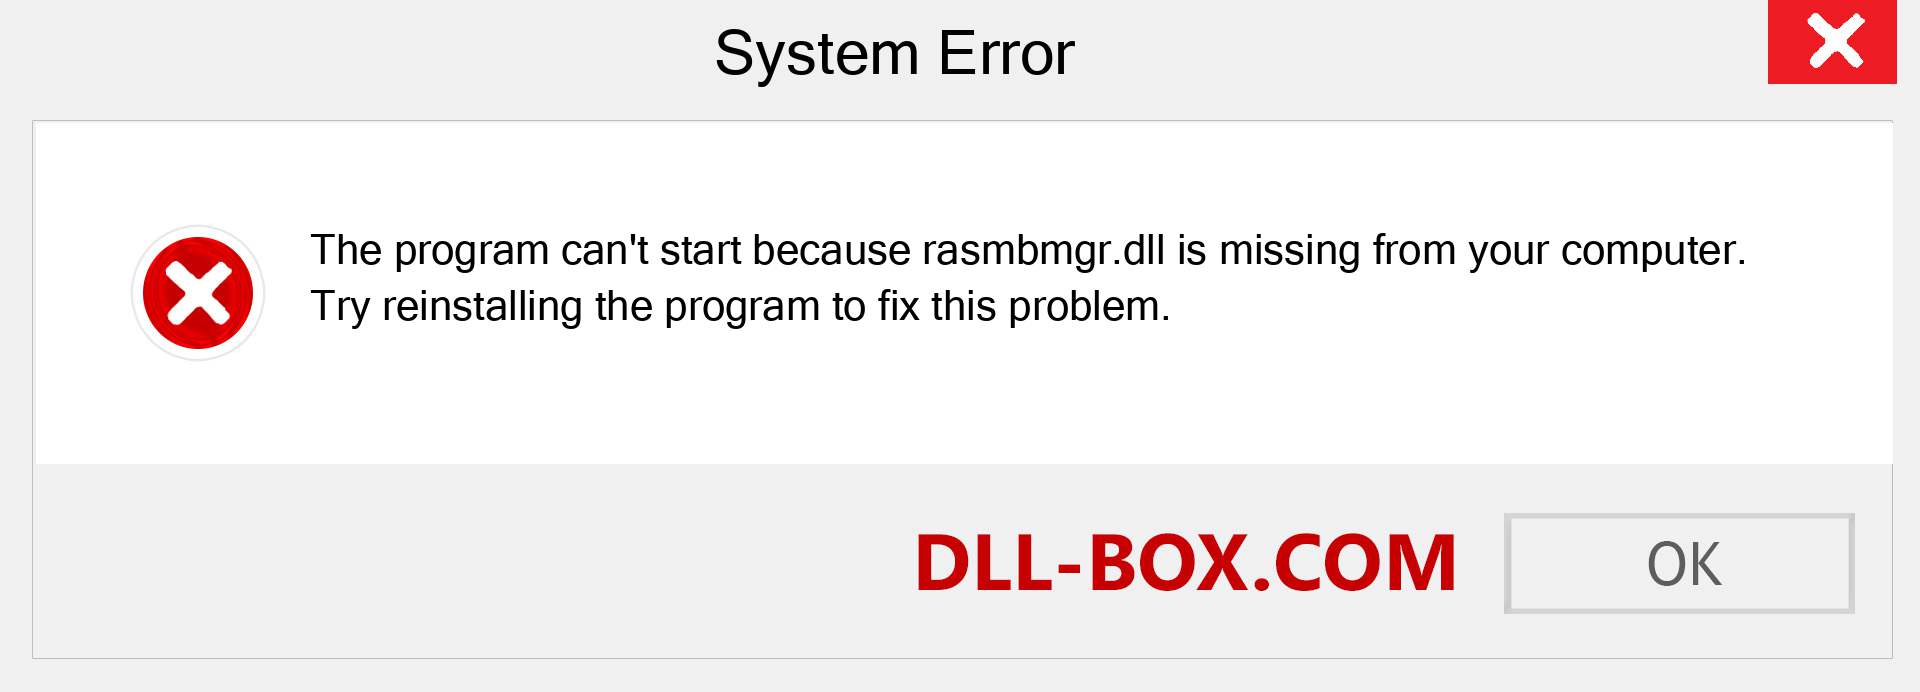  rasmbmgr.dll file is missing?. Download for Windows 7, 8, 10 - Fix  rasmbmgr dll Missing Error on Windows, photos, images